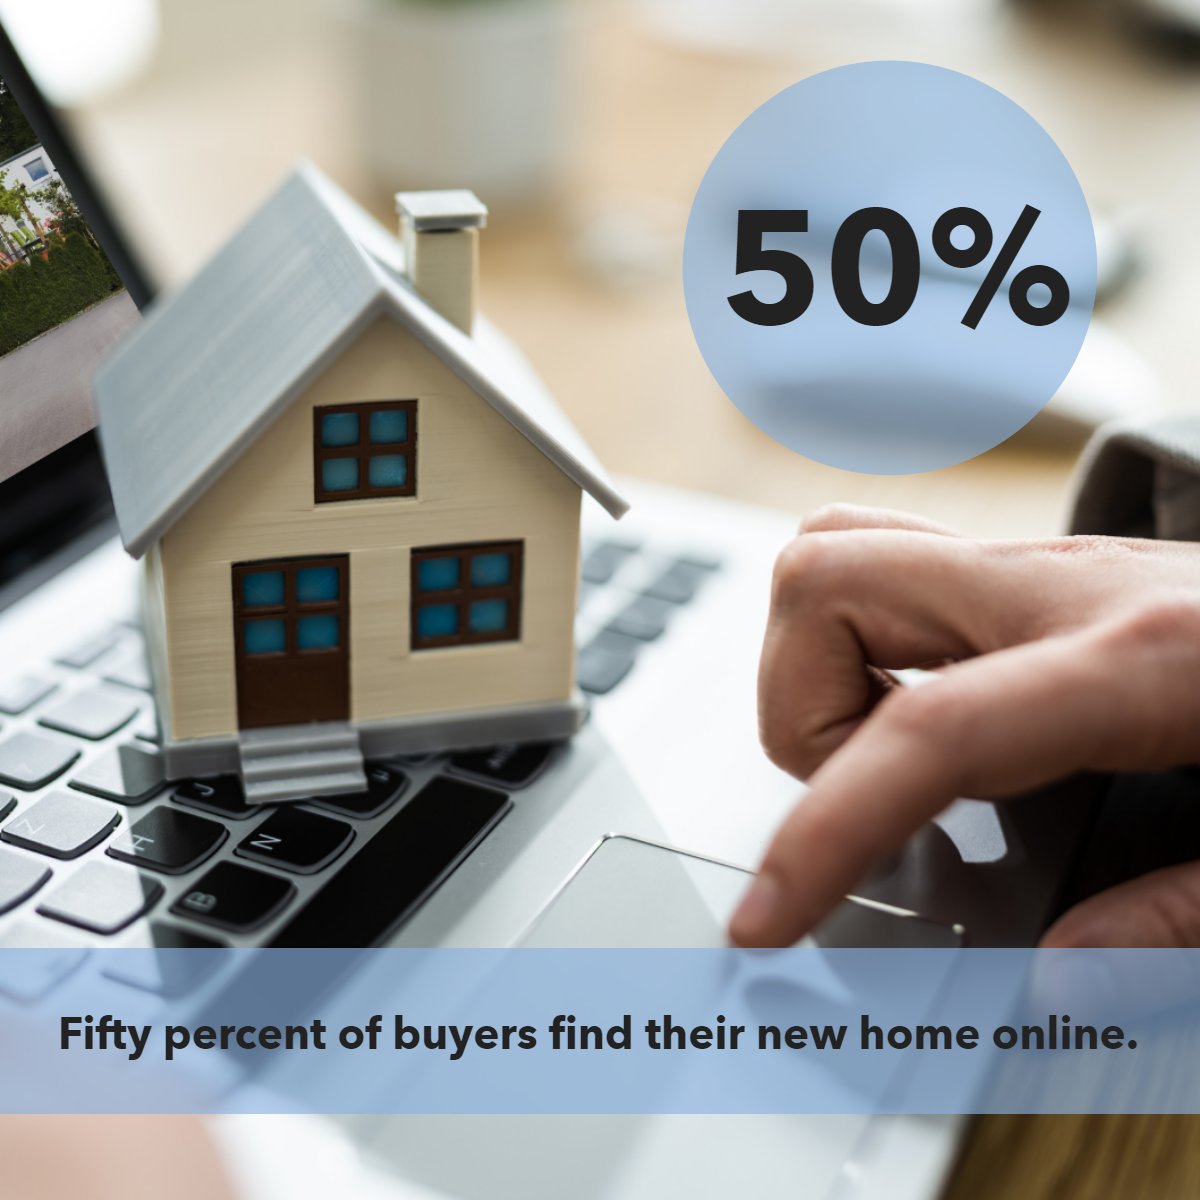 And I am pretty sure this number will only go up in the future! 📈

#funfacts   #online   #buyers   #buyingonline   #homesearch   #househunting
#realestate #malden #wakefield #melrose #medford #stoneham #93north